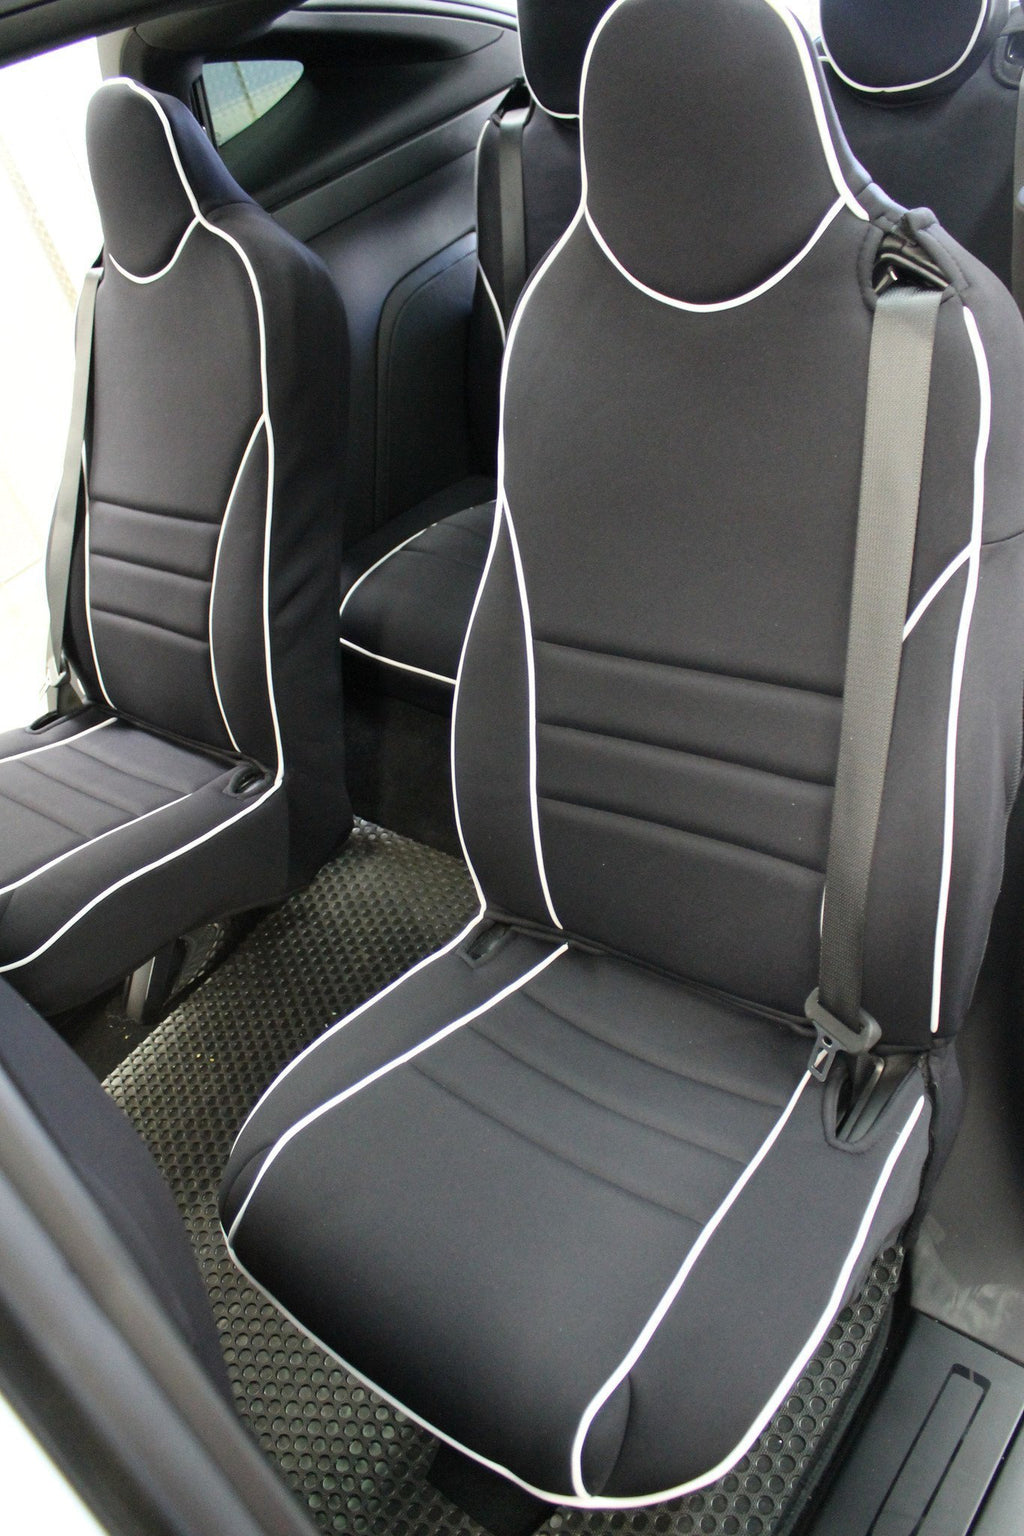 I Installed Taptes Seat Covers on My Model Y: An In-Depth Review